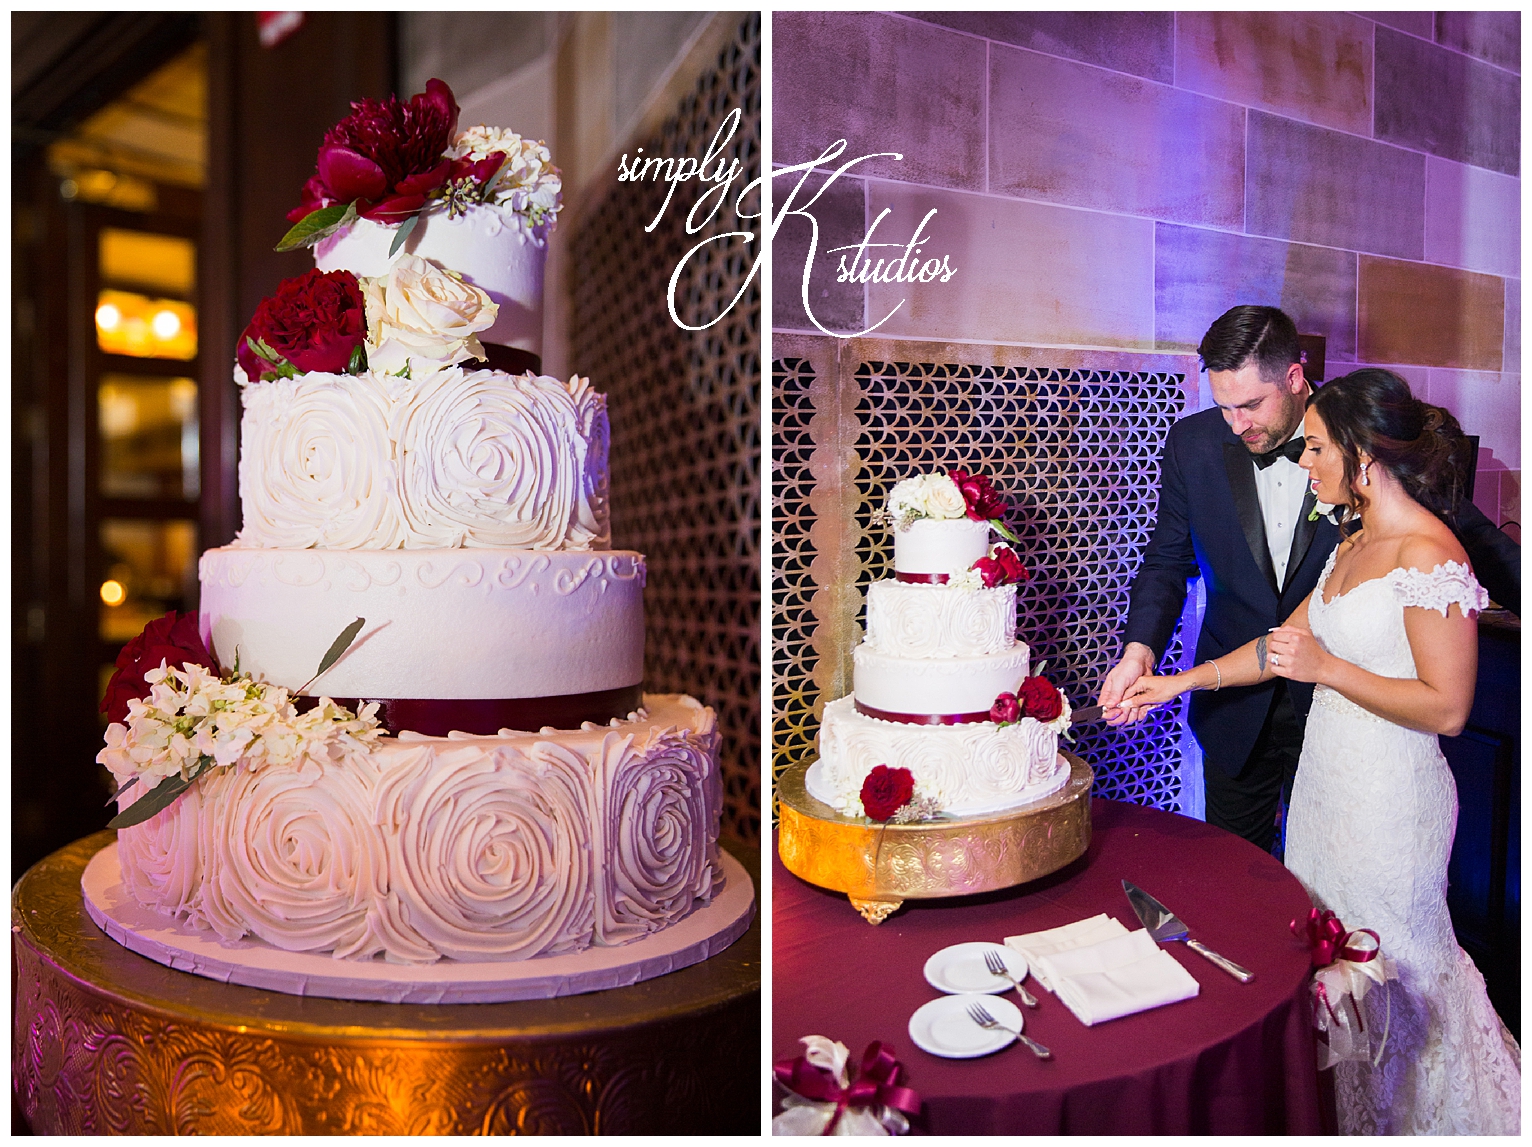 100 Wedding Cakes from Kims Cottage Confections.jpg